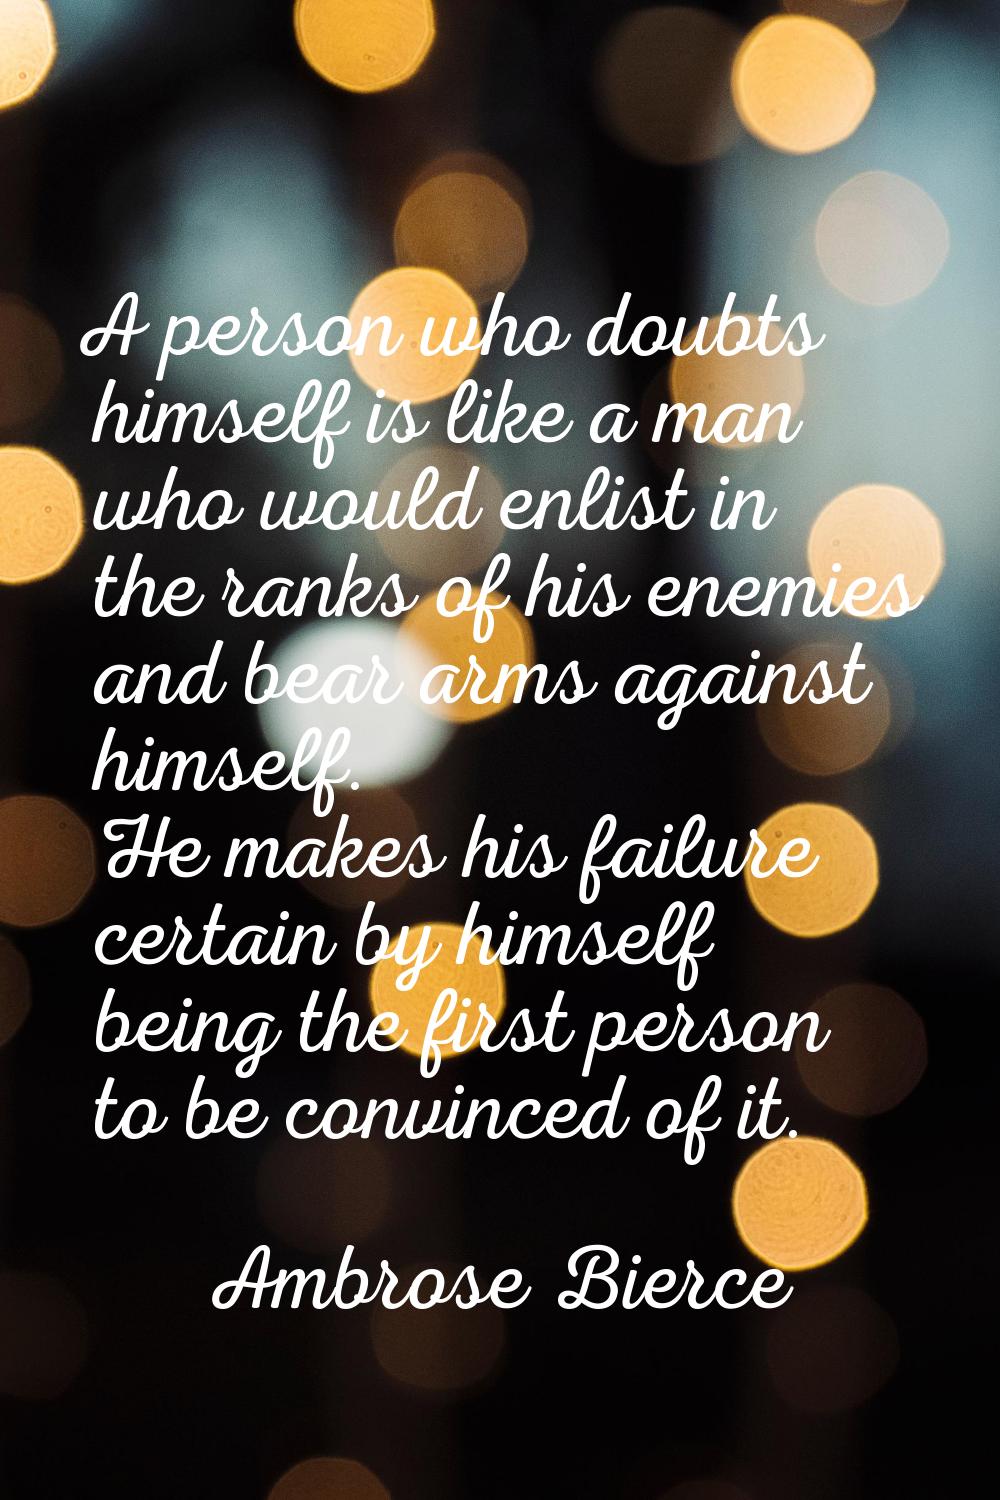 A person who doubts himself is like a man who would enlist in the ranks of his enemies and bear arm